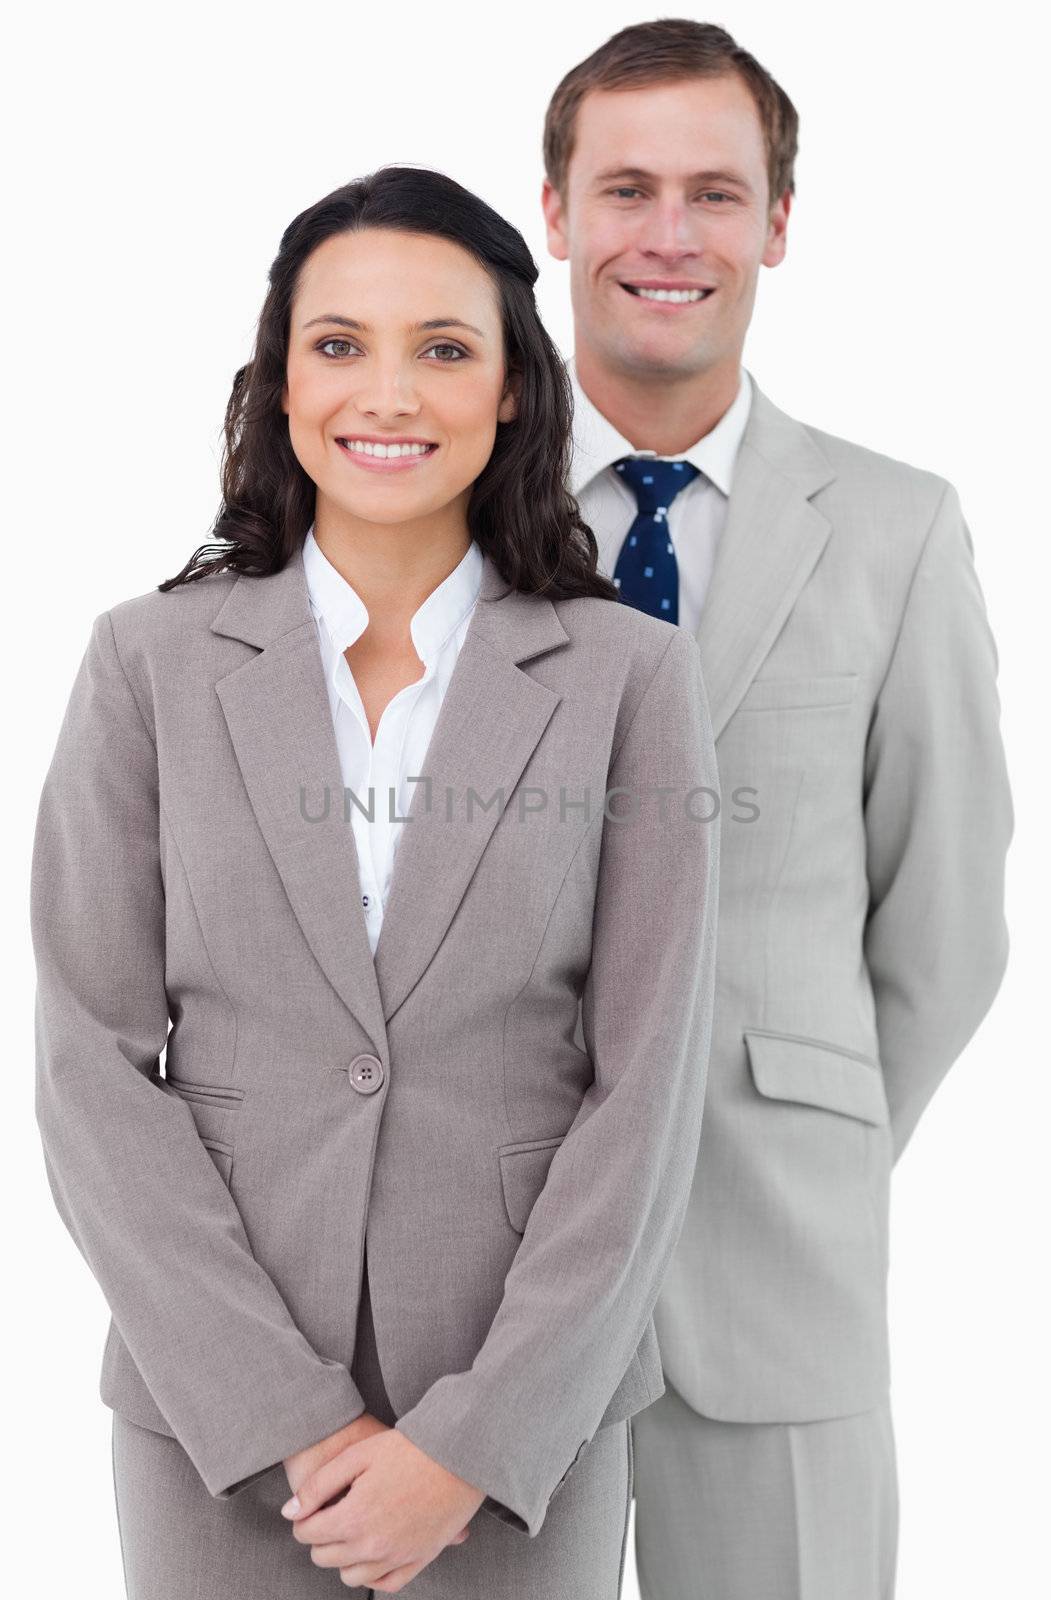 Smiling office staff standing together against a white background